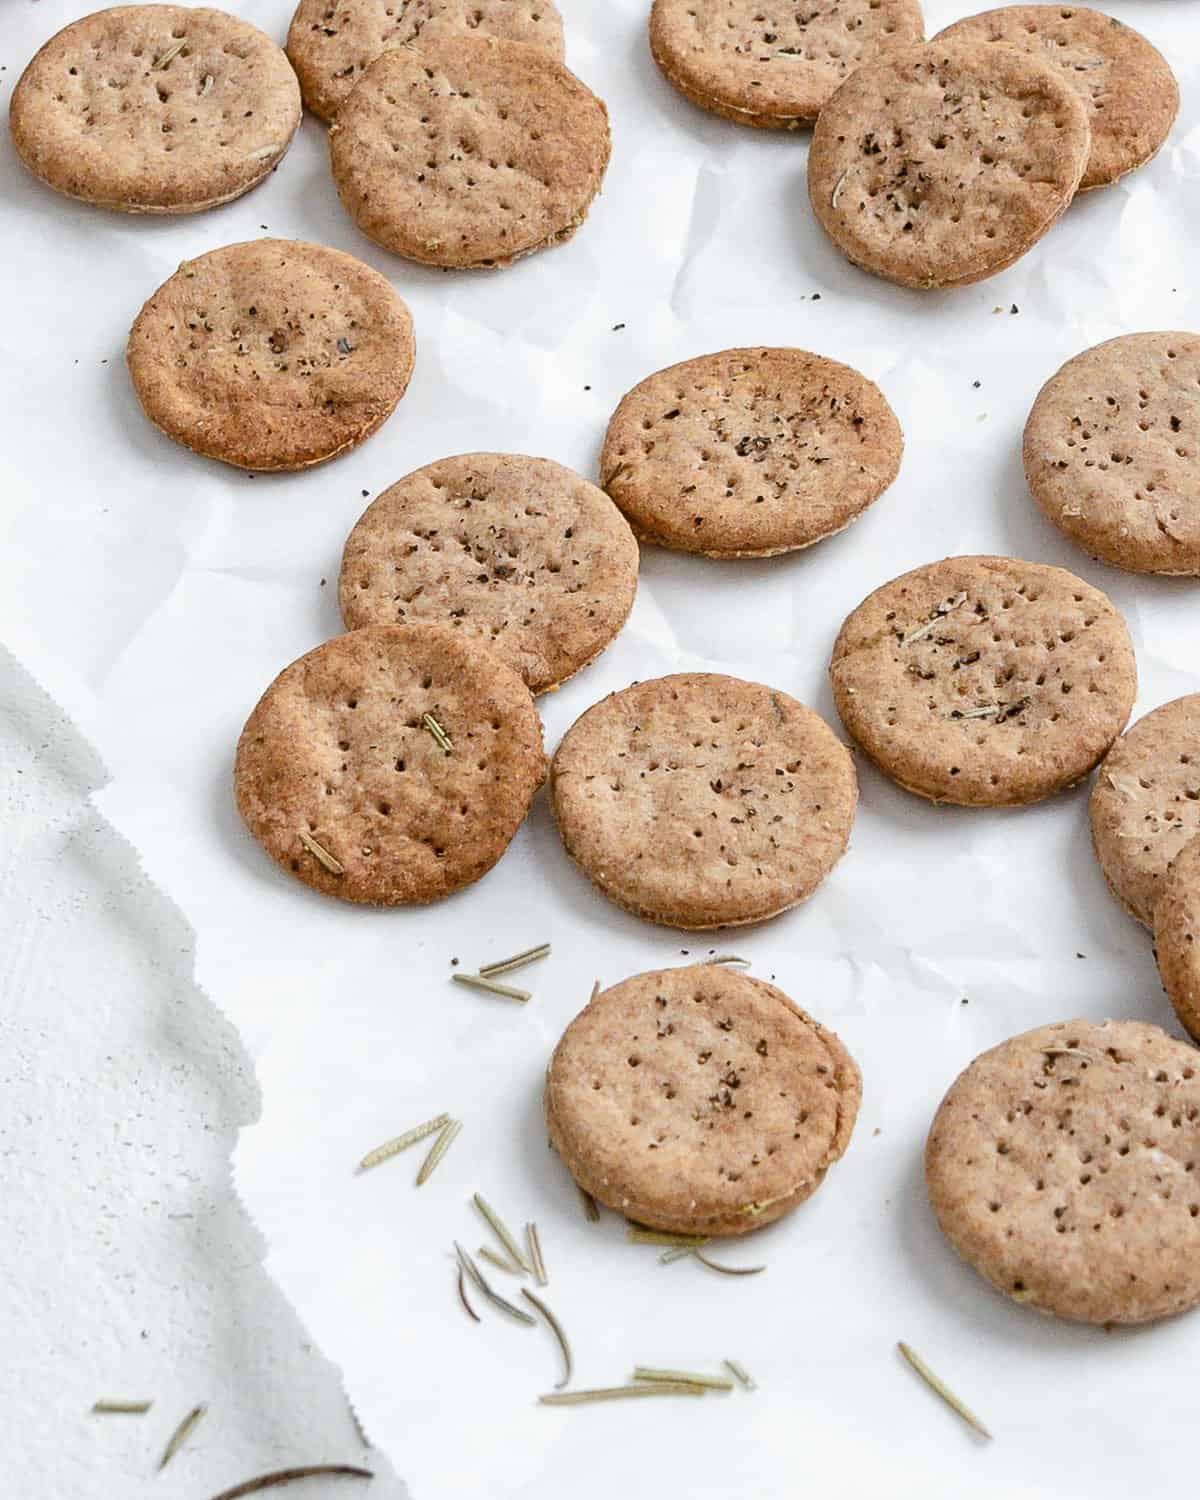 completed Rosemary Vegan Crackers scattered on a white surface